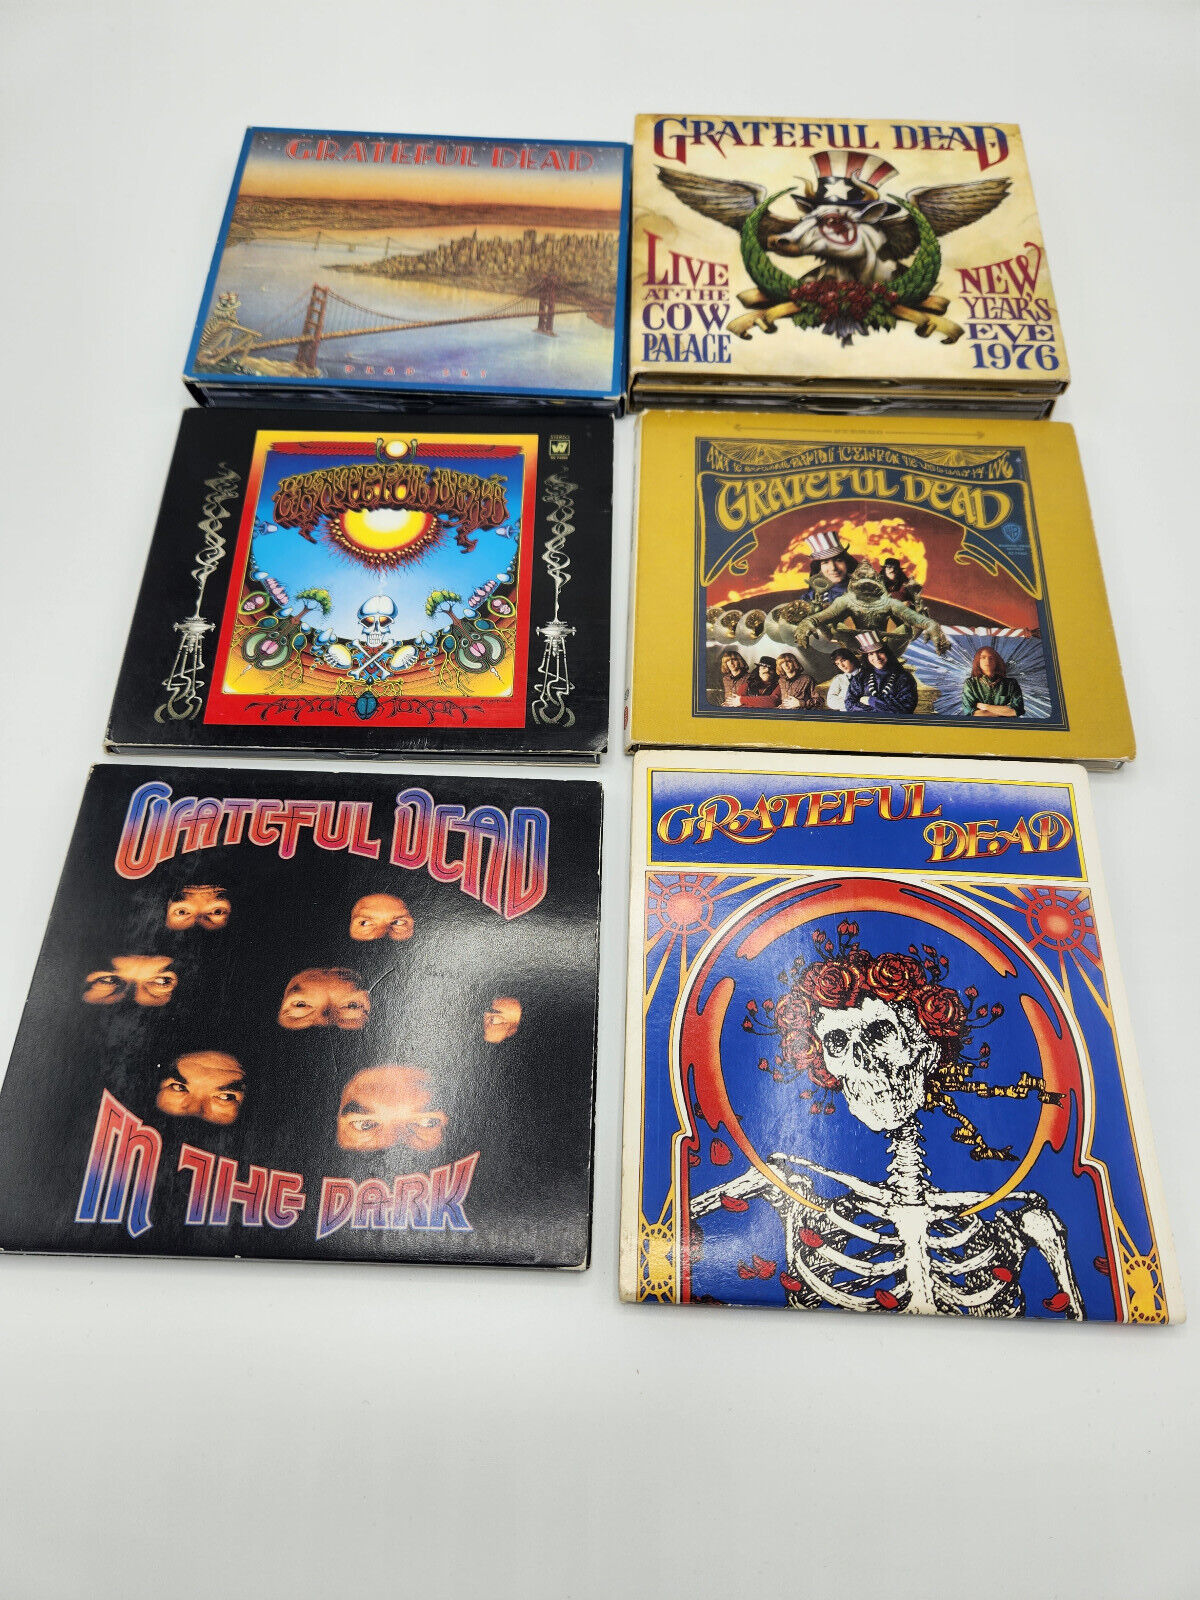 Grateful Dead CD Six-Pack Set Digipak And All Booklets  Included